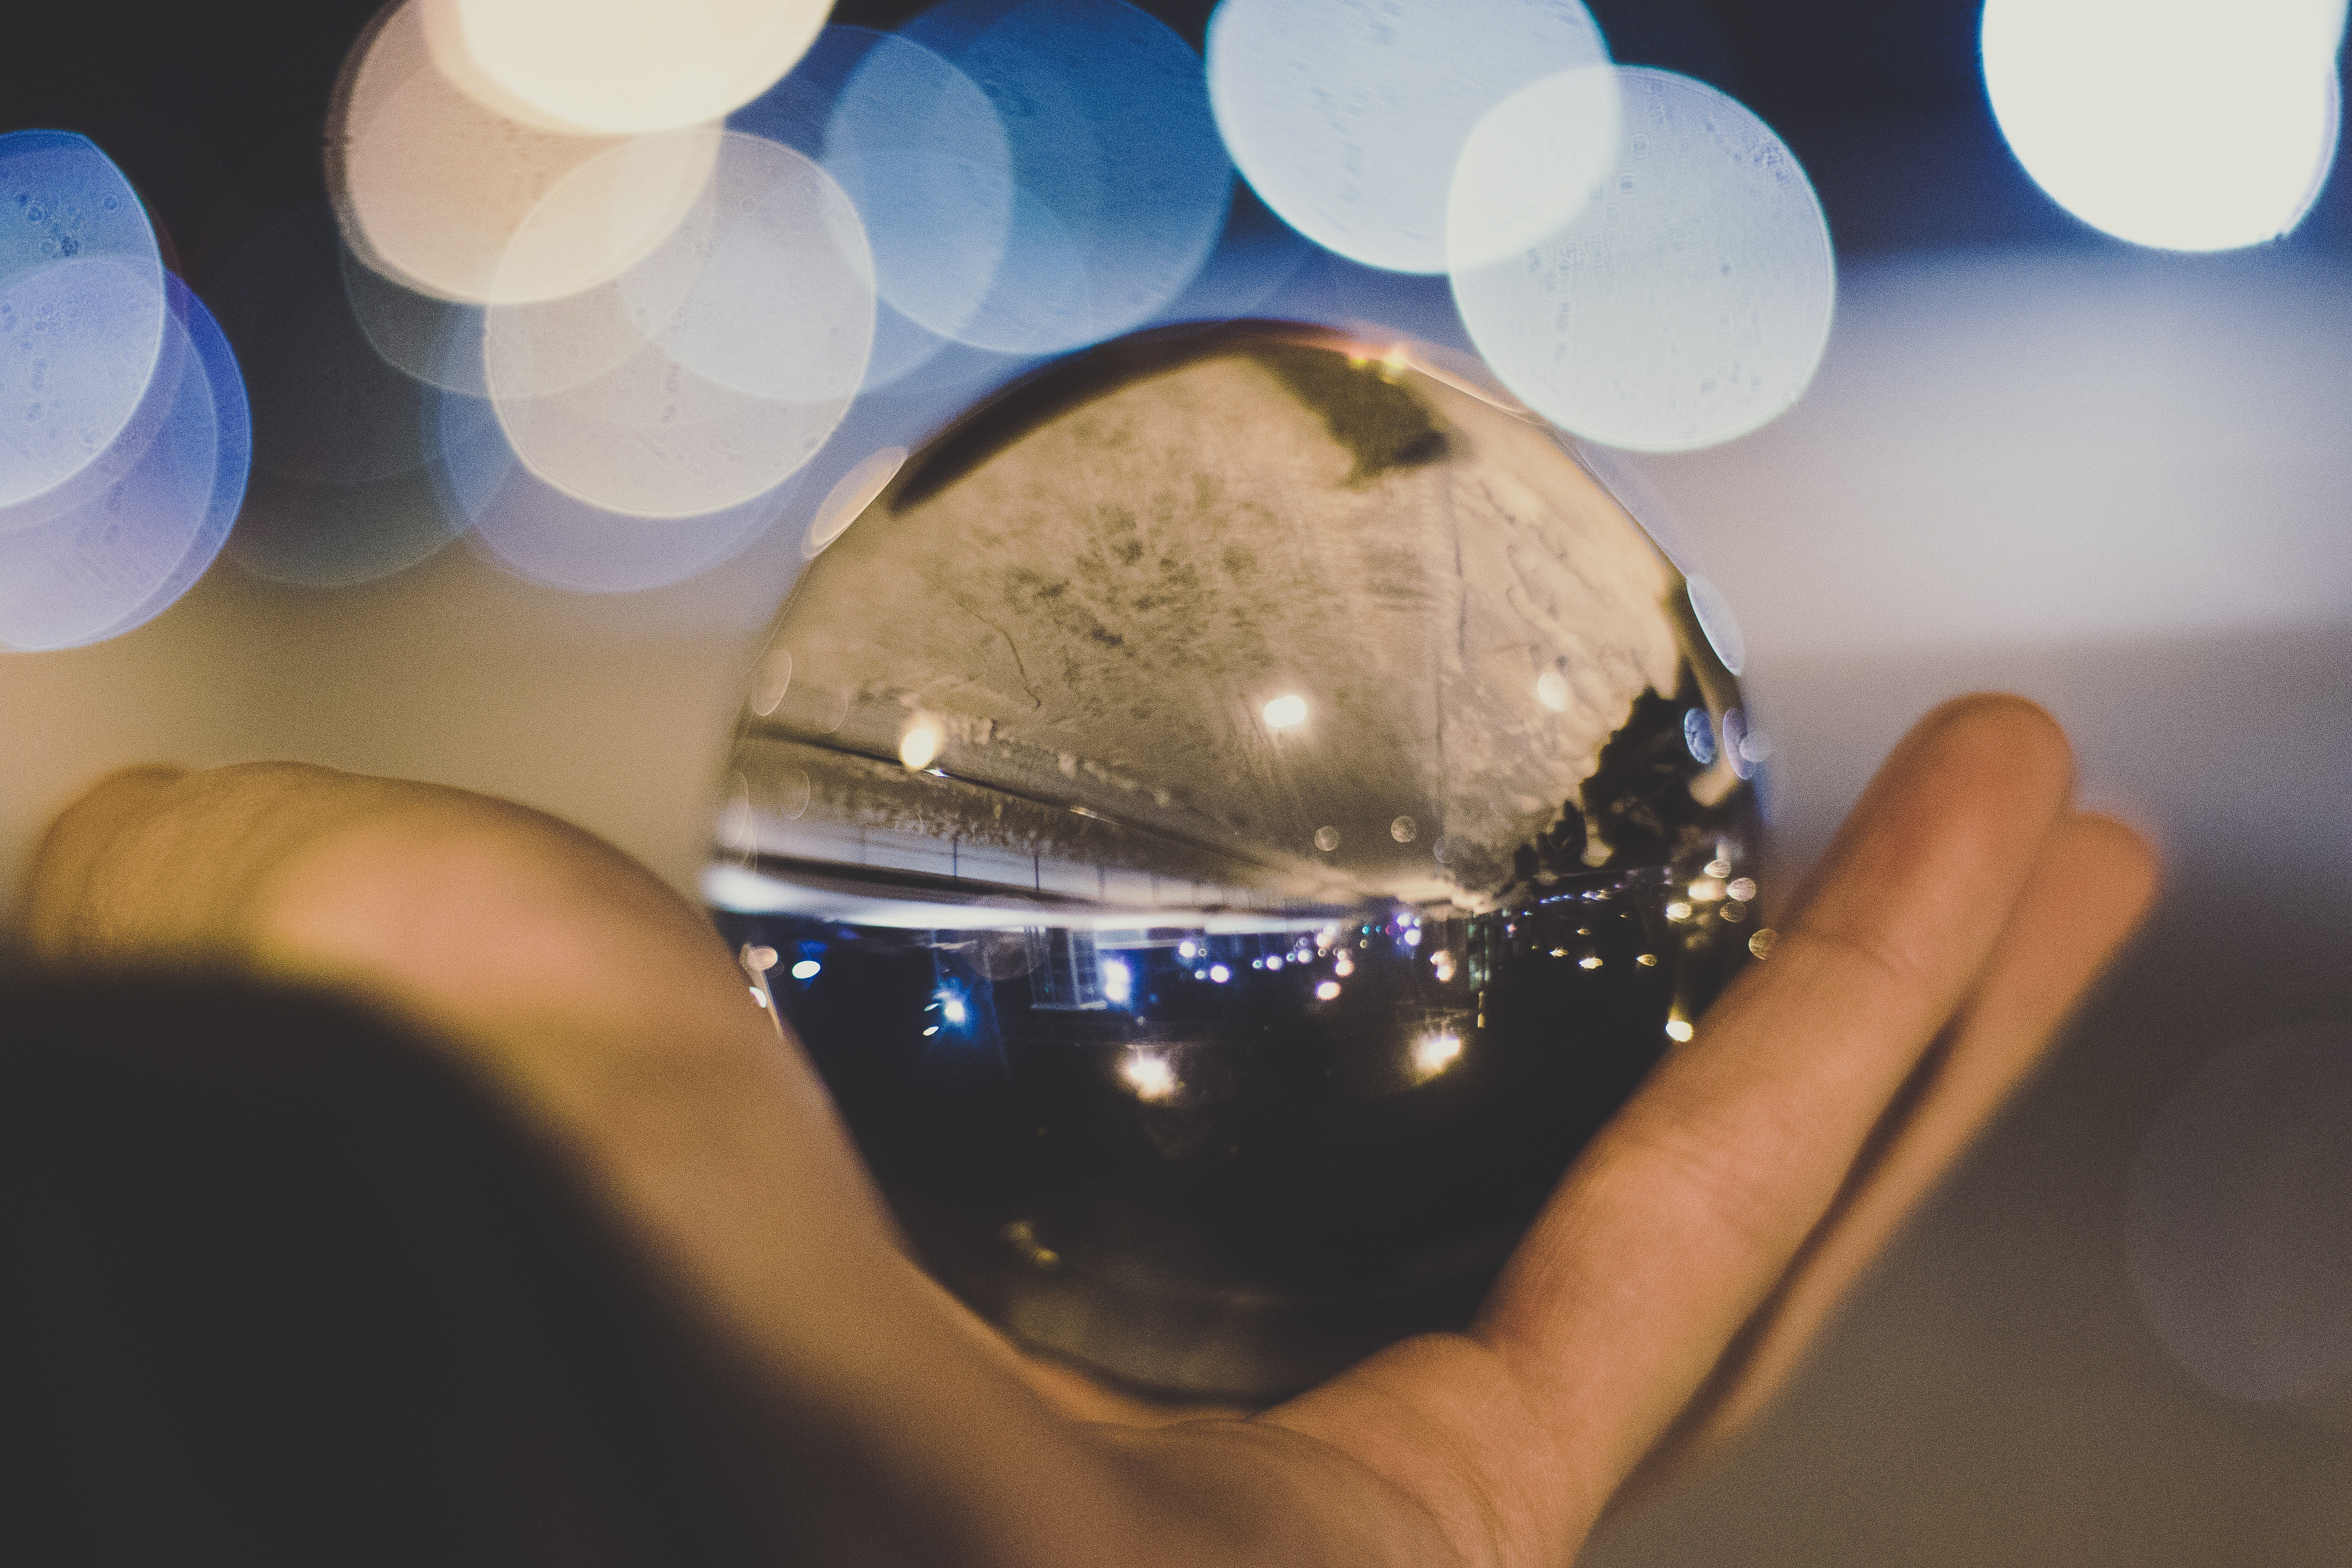 Crystal ball on person's hand photo